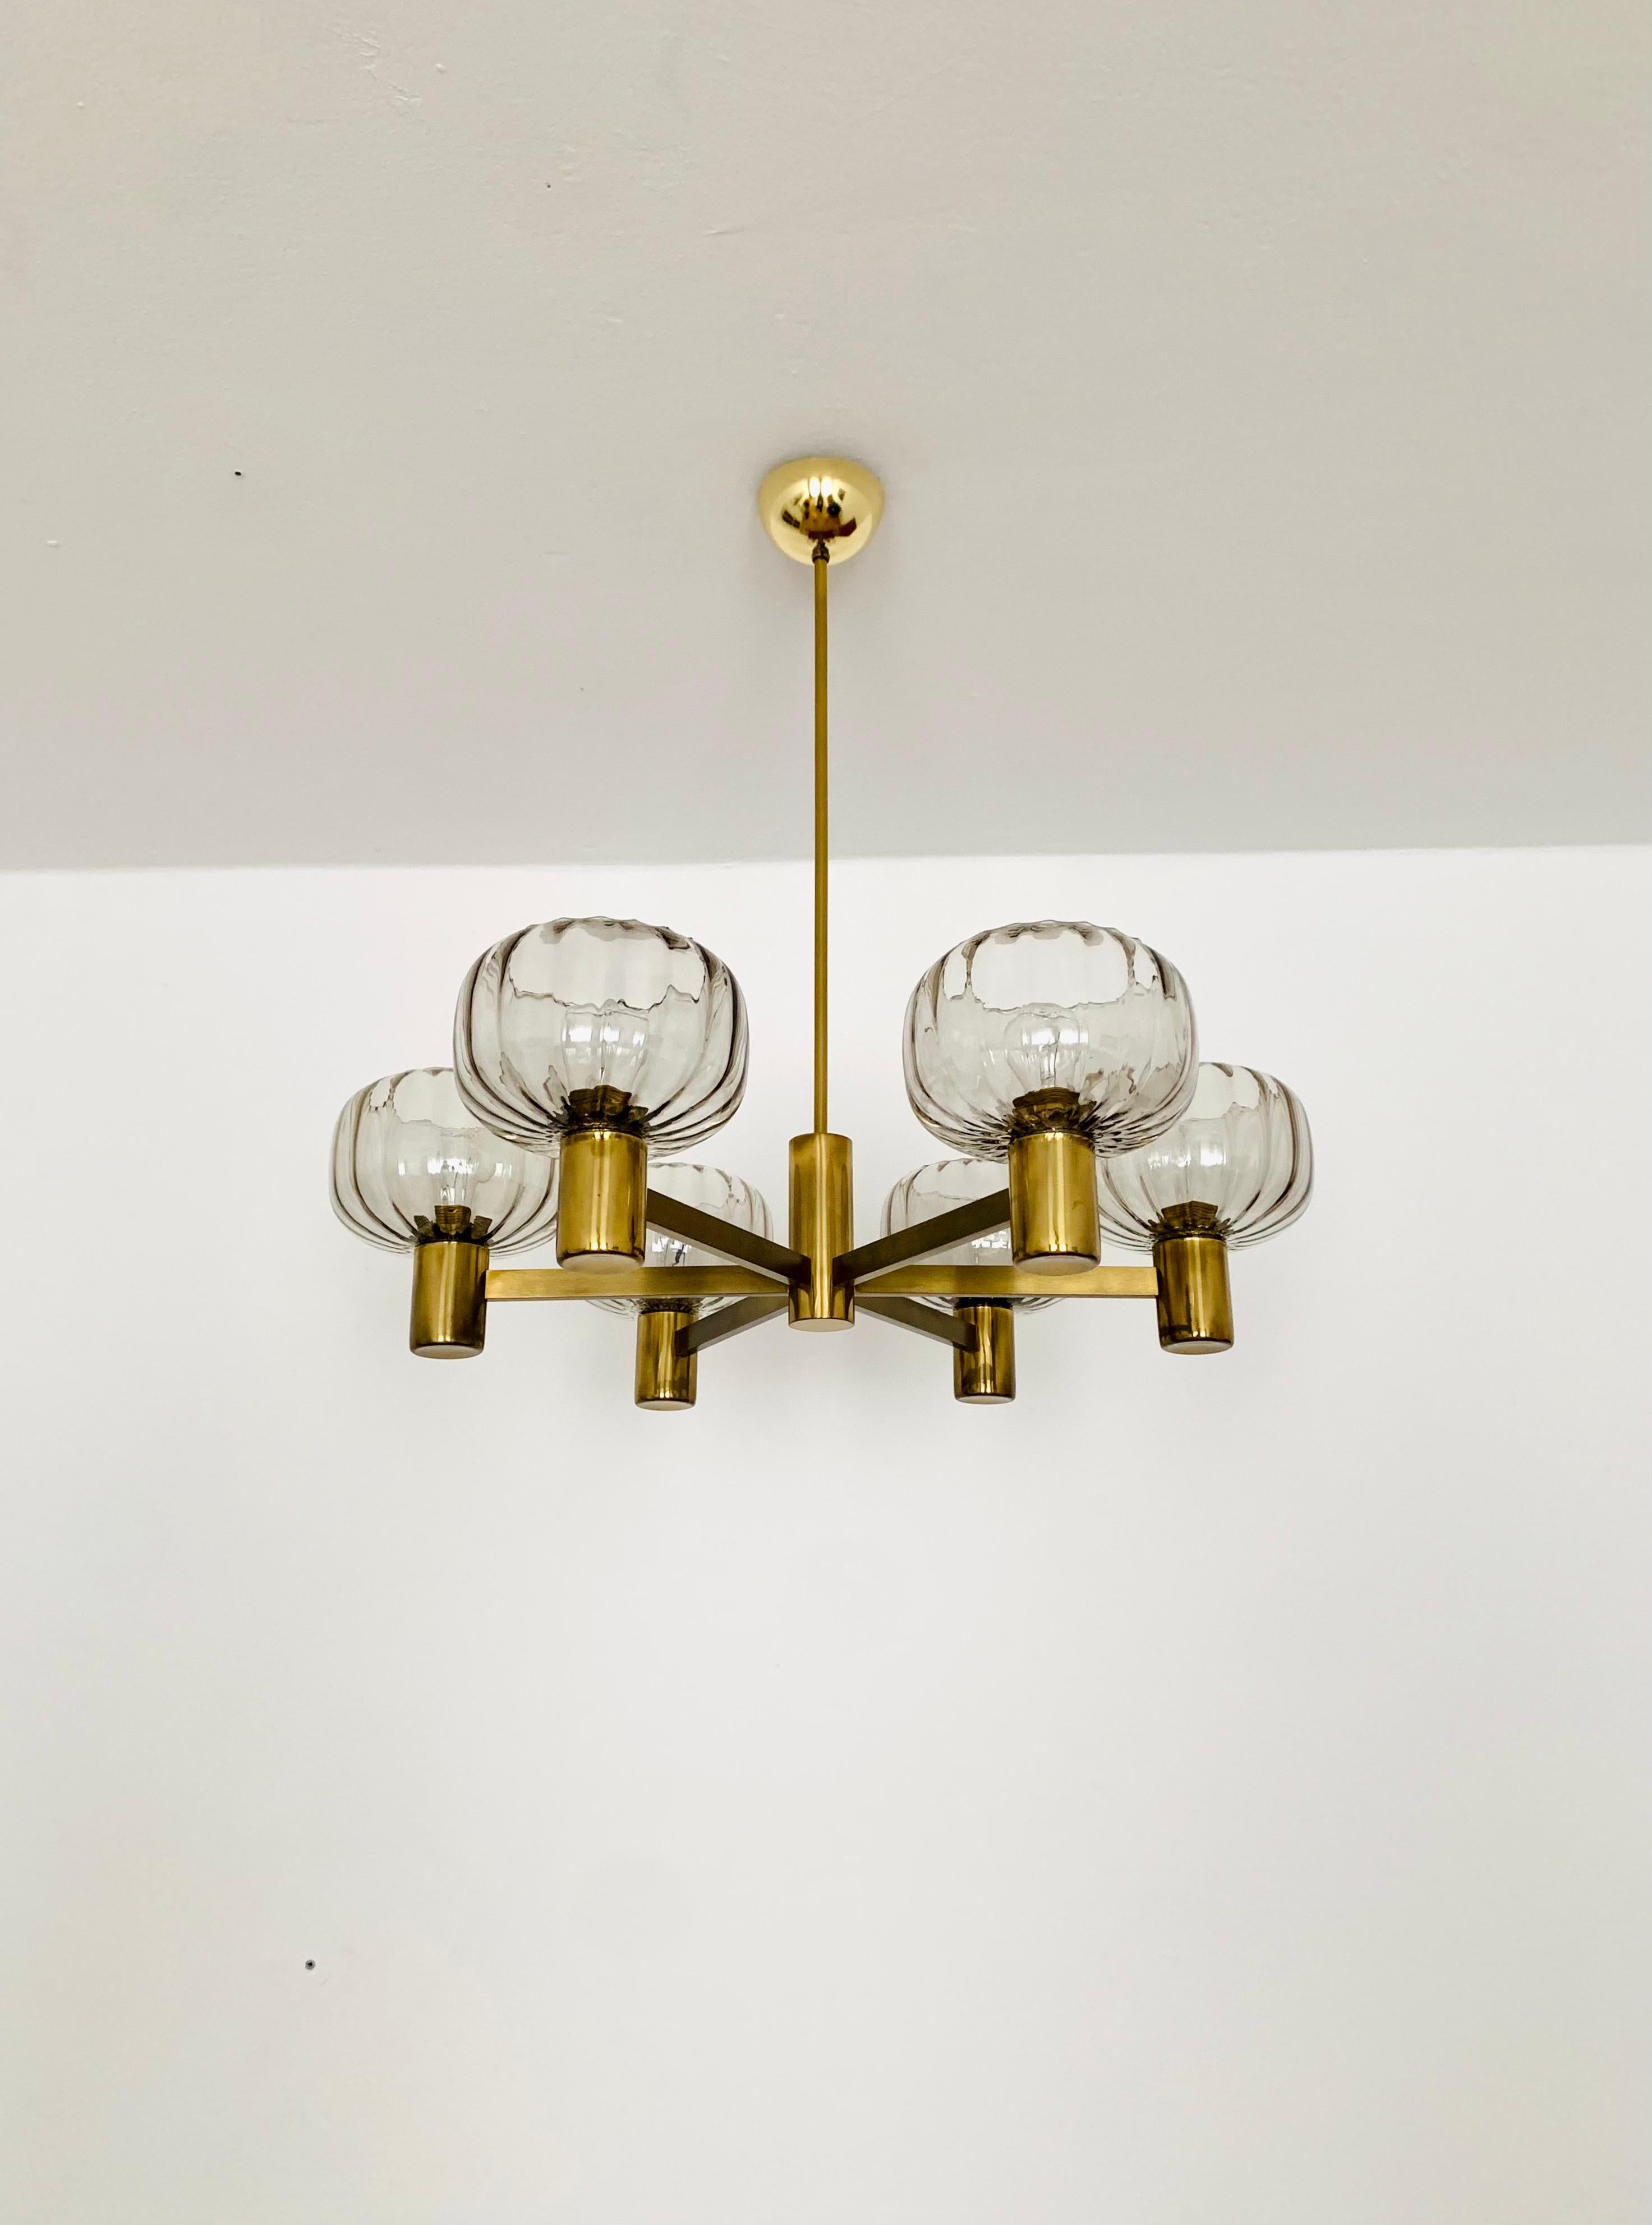 Very nice chandelier from the 1960s.
The 6 lampshades spread a spectacular light.
The lamp is manufactured to a very high quality.
Very contemporary design with a fantastic, elegant look.

Condition:

Very good vintage condition with slight signs of